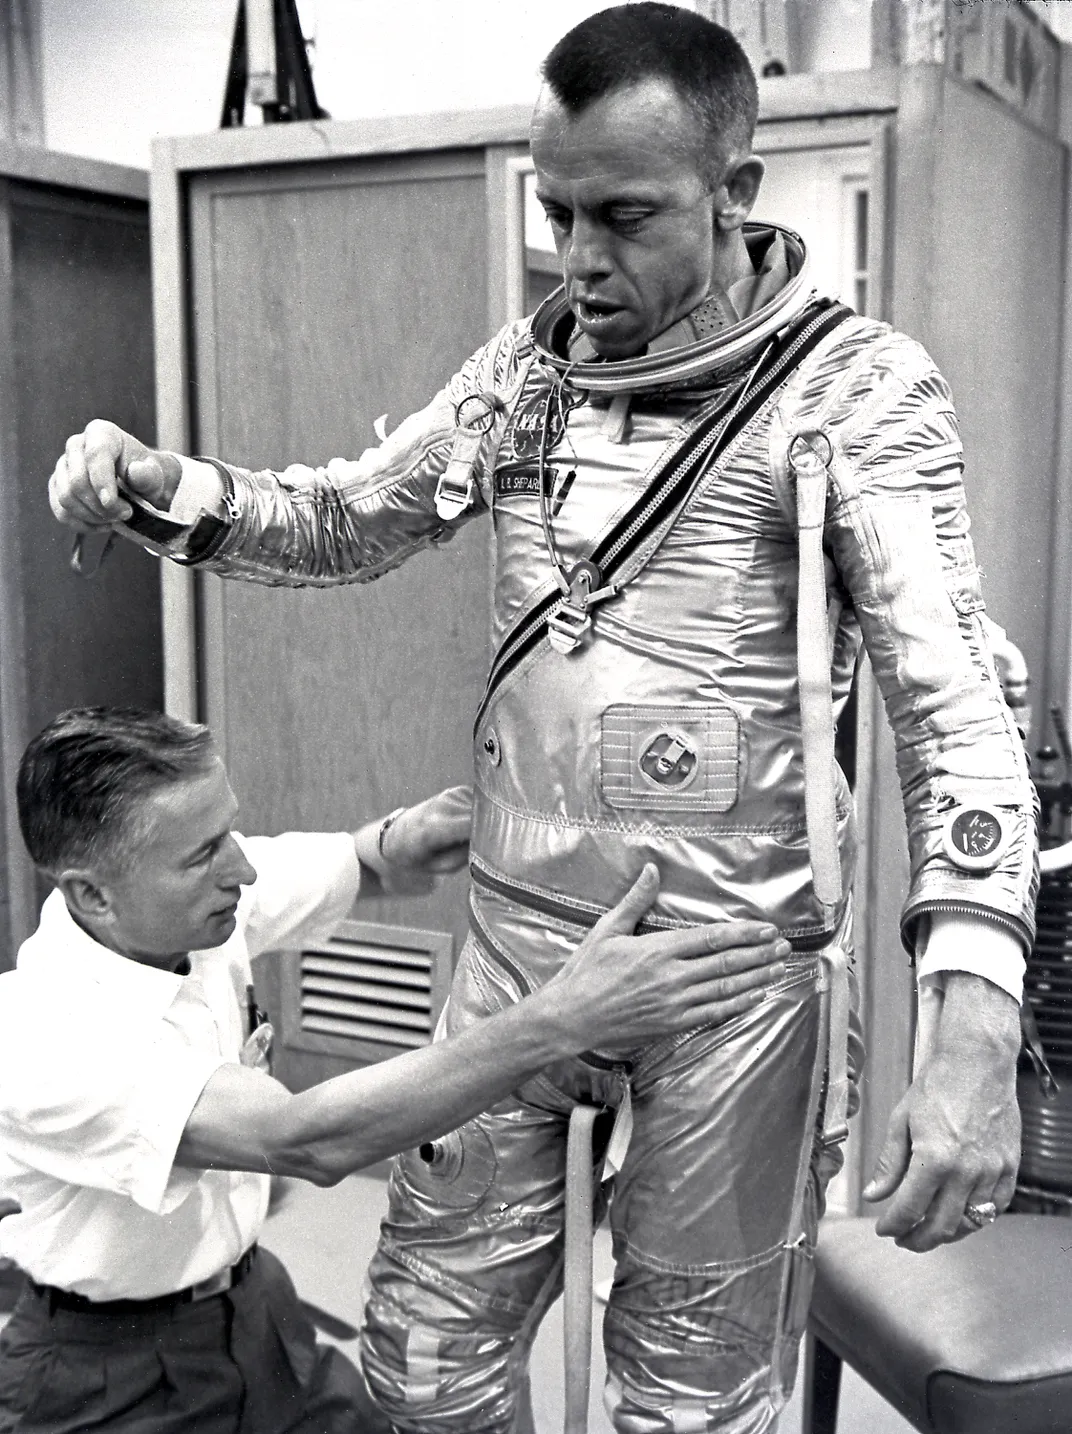 Alan Shepard fitted into his space suit, May 5, 1961